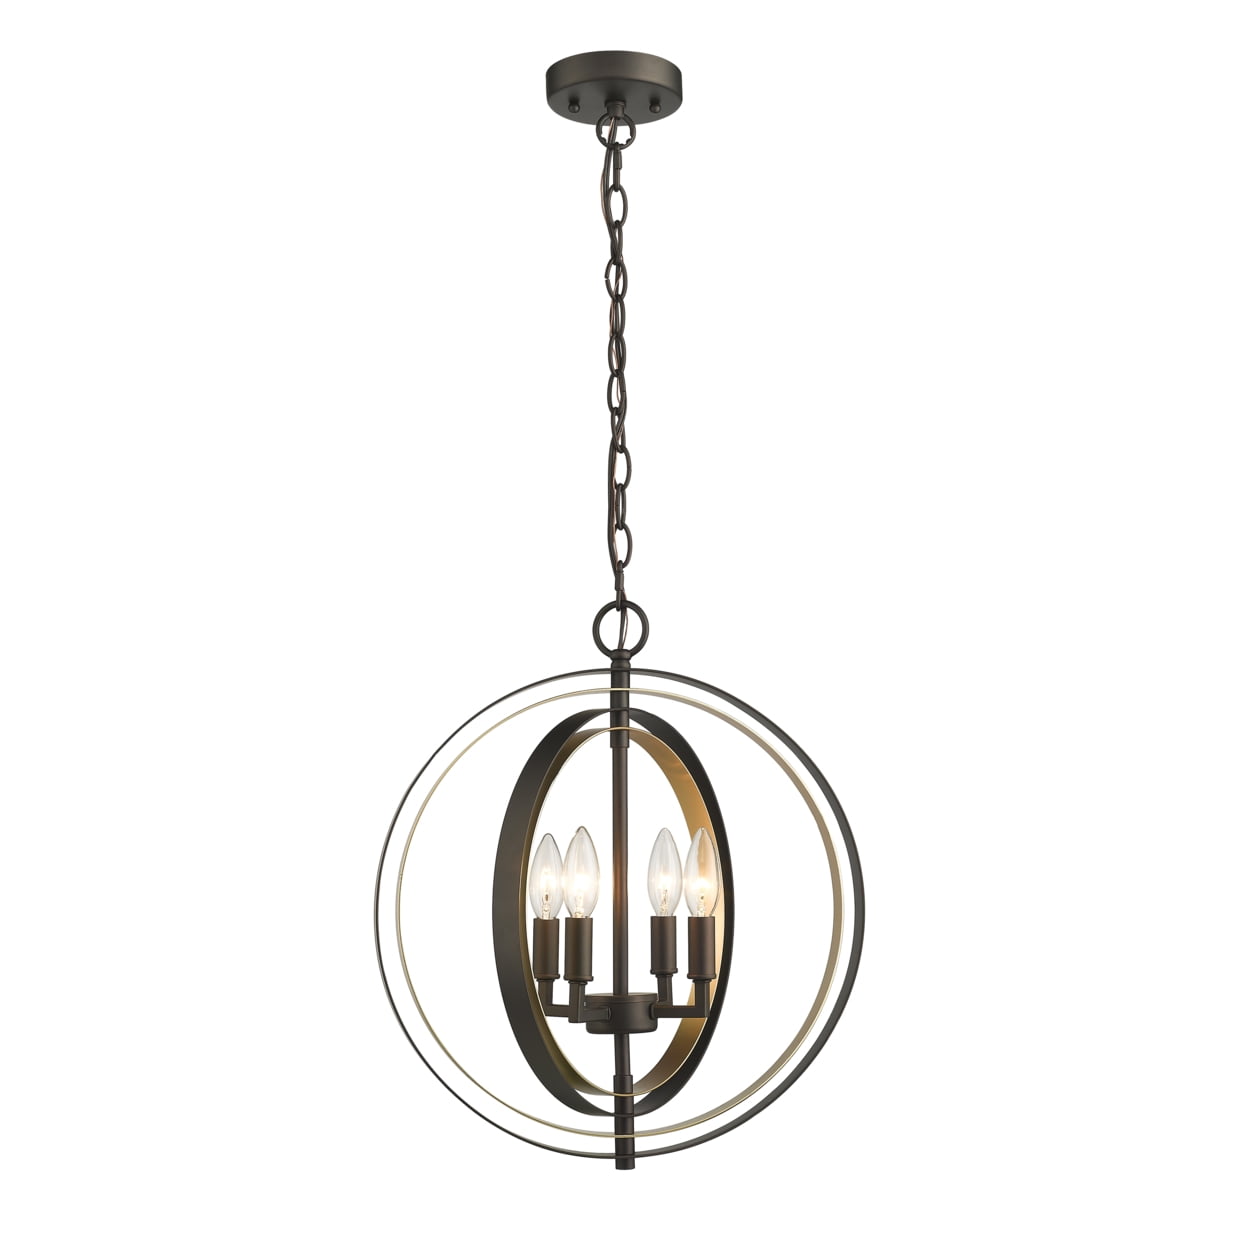 Ch2d125rg16-up4 Darby Industrial 4 Light Rubbed Bronze & Gold Ceiling Pendant - 16 In.